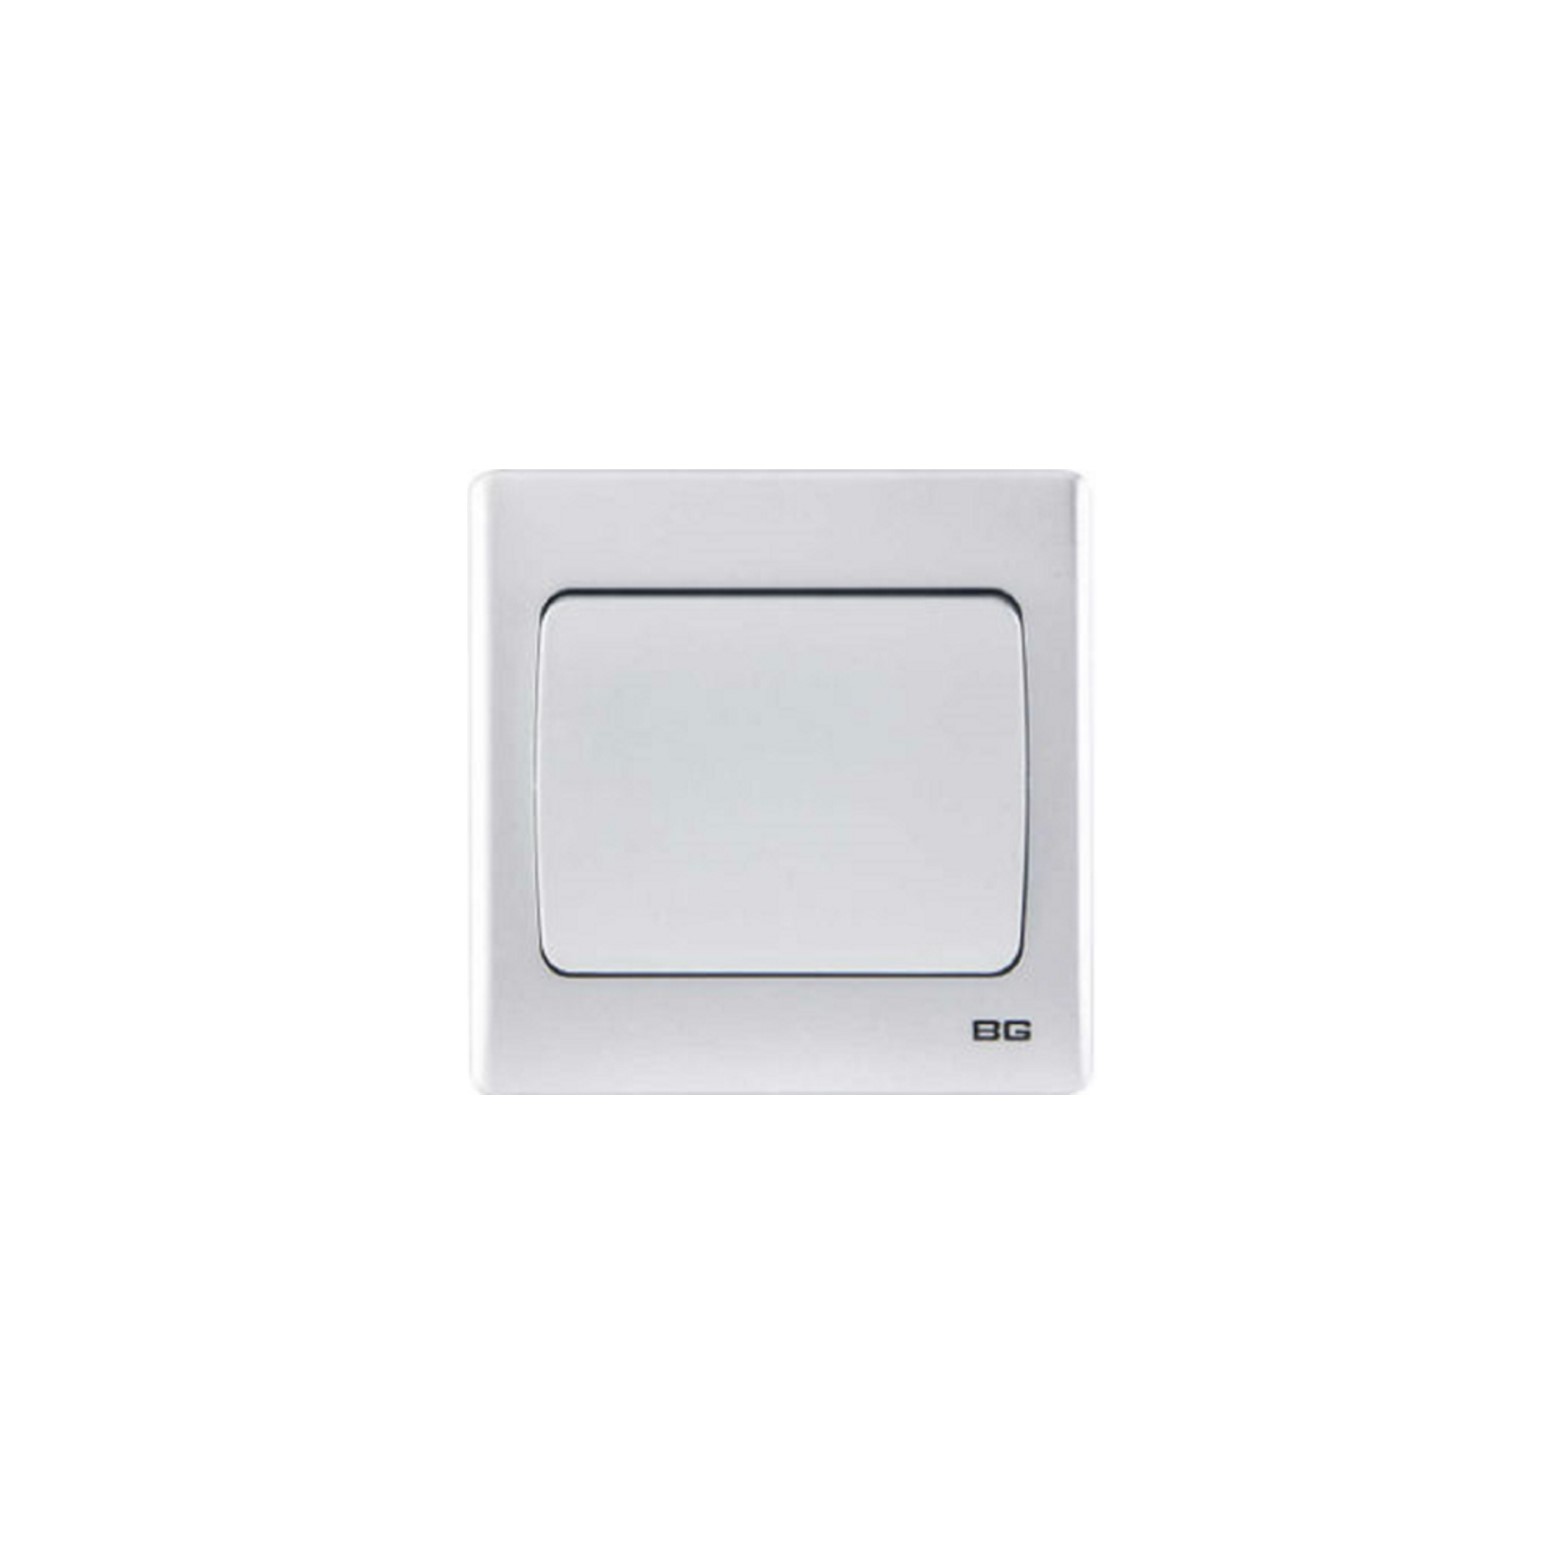 Silver SlimLine 1-Gang 2Way 10AX Switch, single screwless clip-on front plate curved corners(PCSL12W)